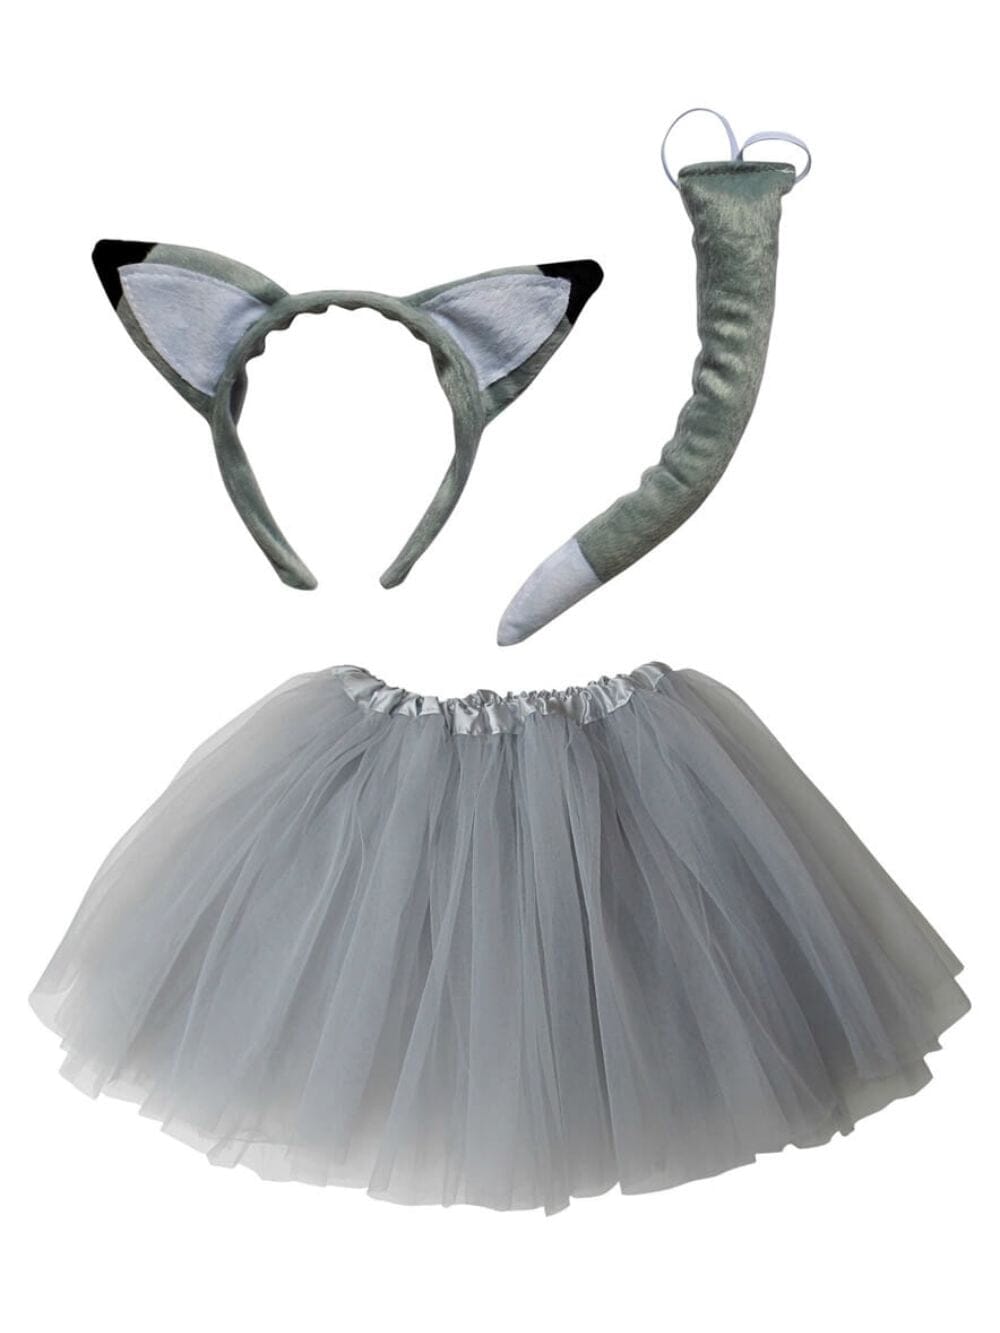 Girls Wolf or Gray Fox Costume - Complete Kids Costume Set with Tutu, Tail, & Ears - Sydney So Sweet